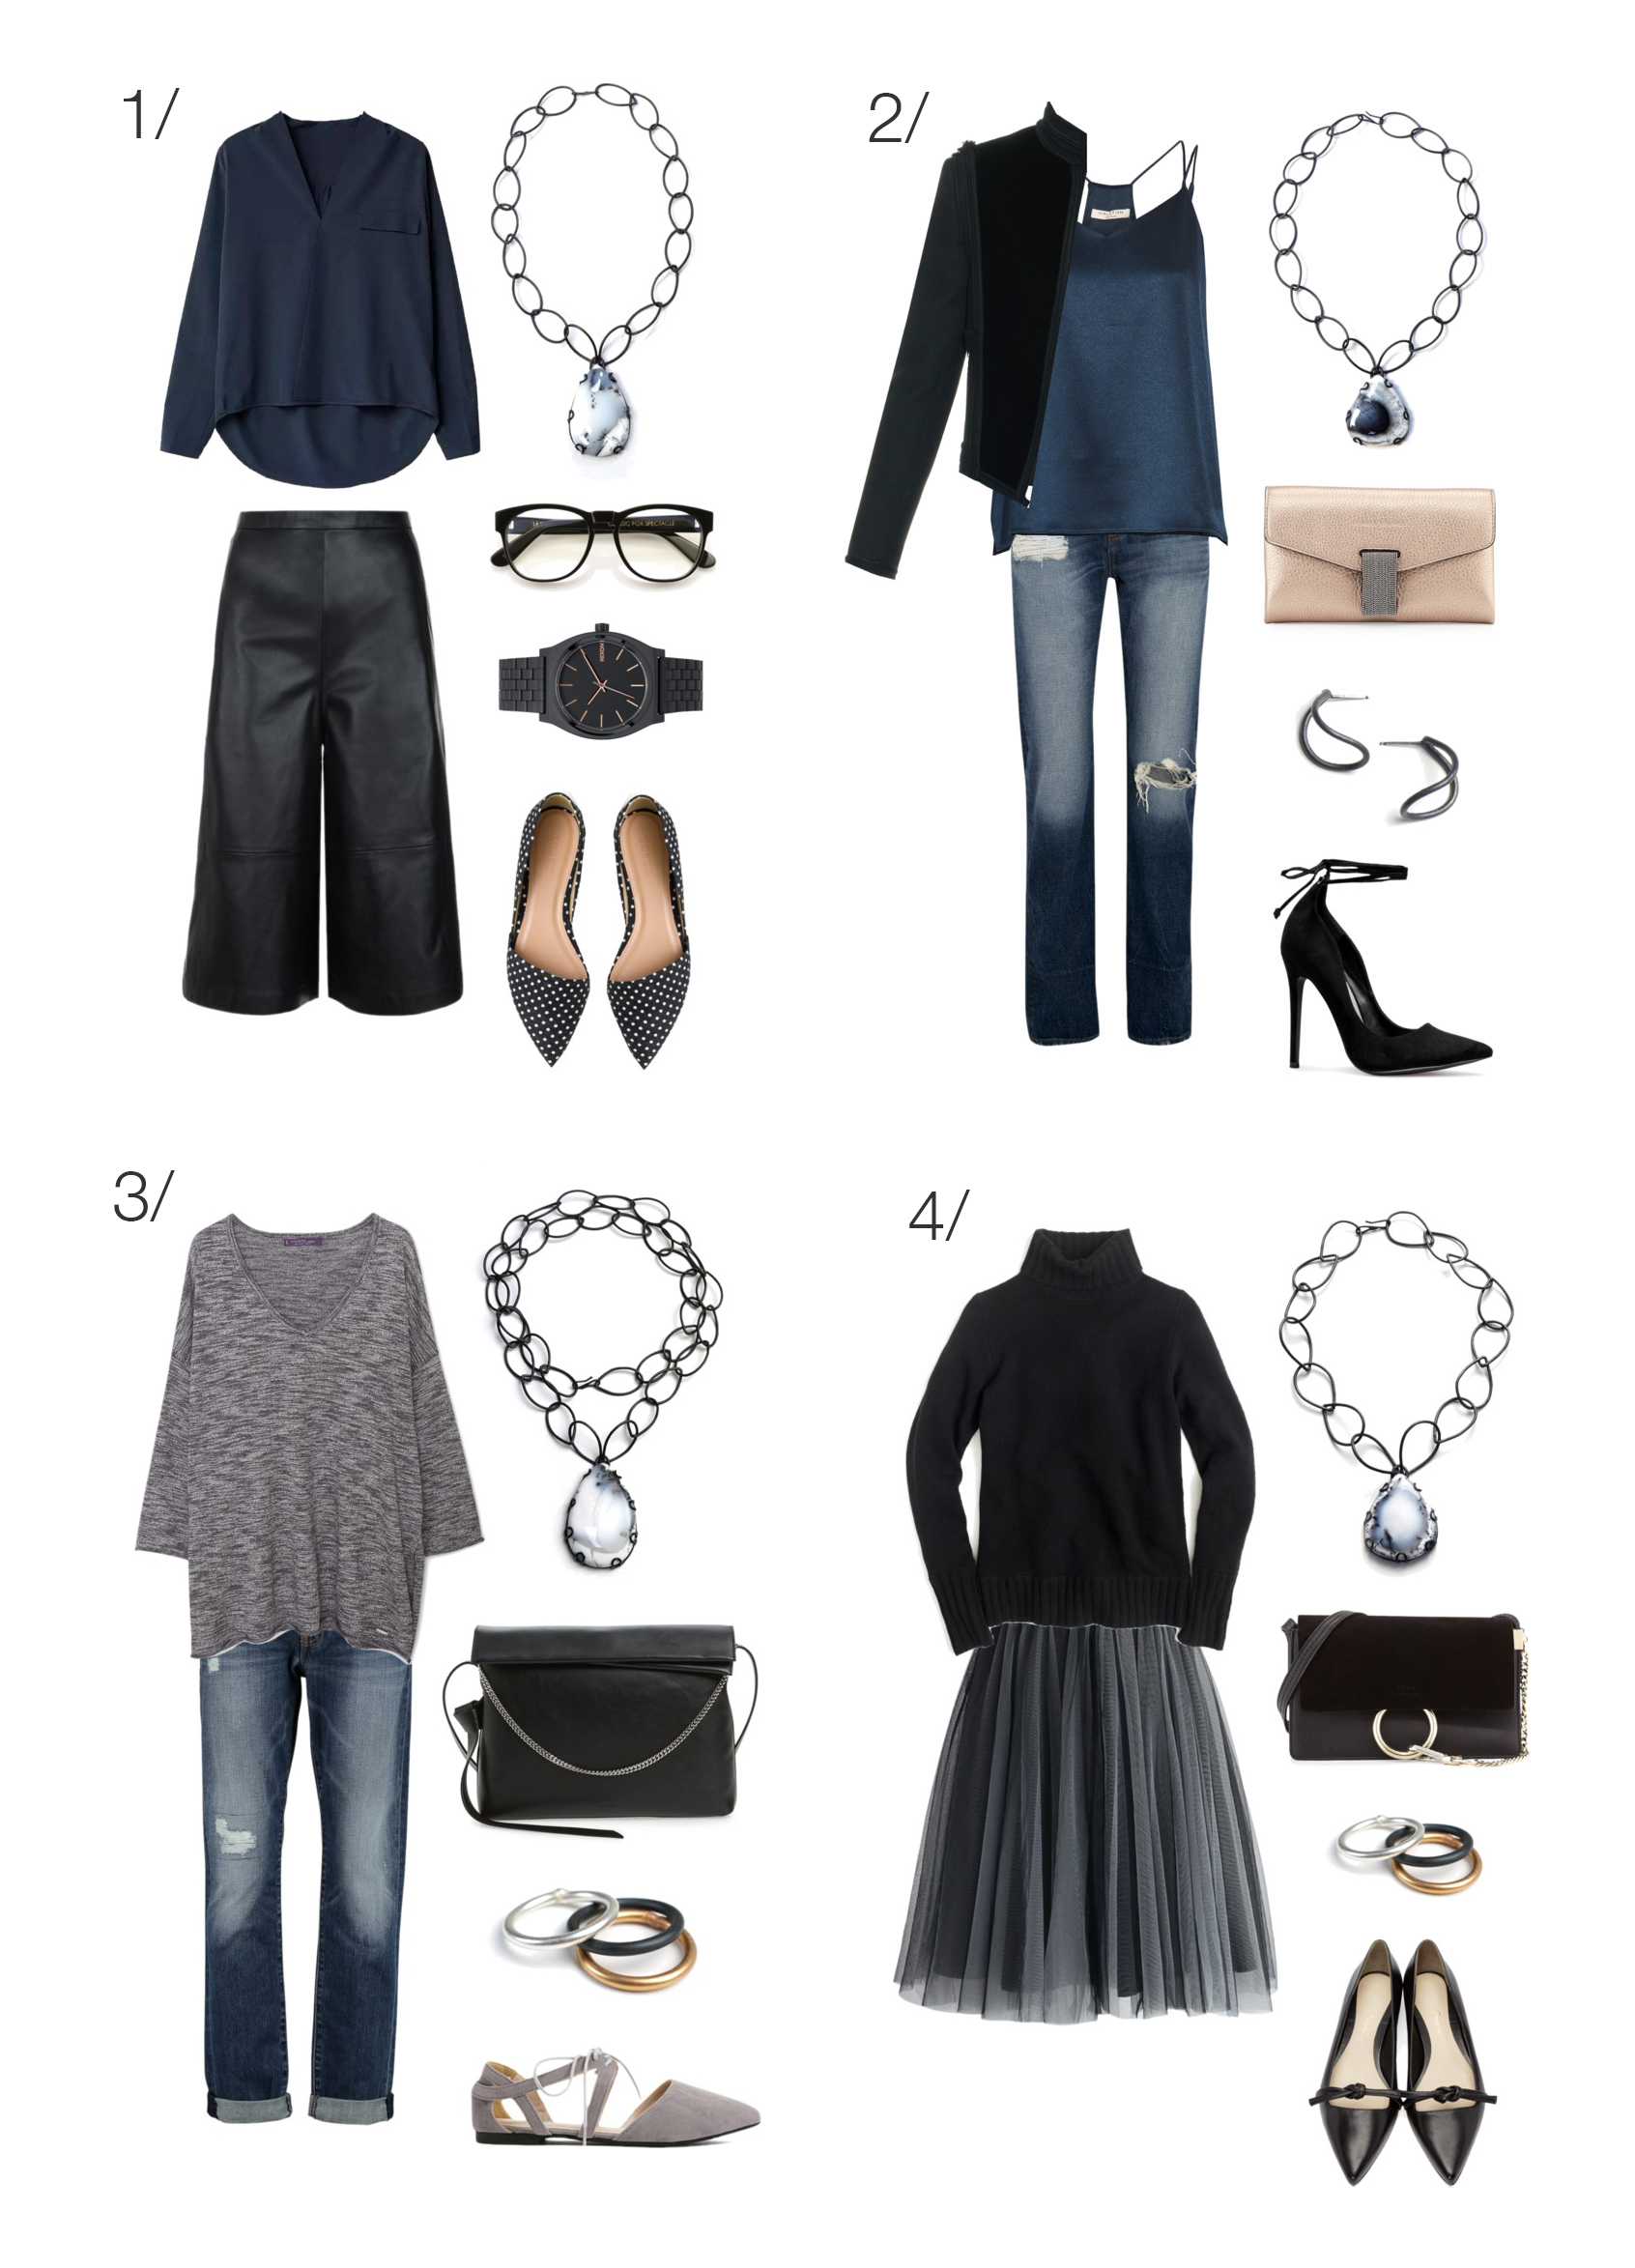 8 ways to wear an amulet-style necklace // click through for outfit ideas